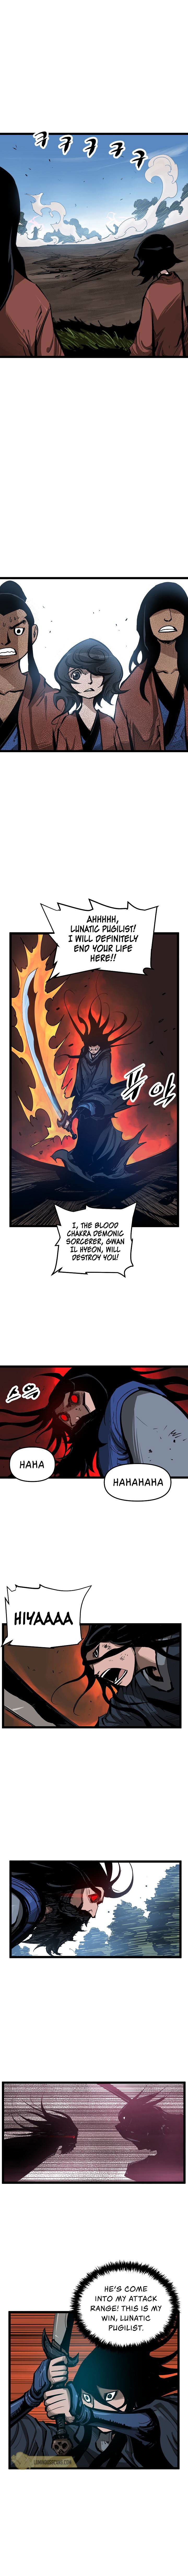 Martial Artist Lee Gwak Chapter 10 page 2